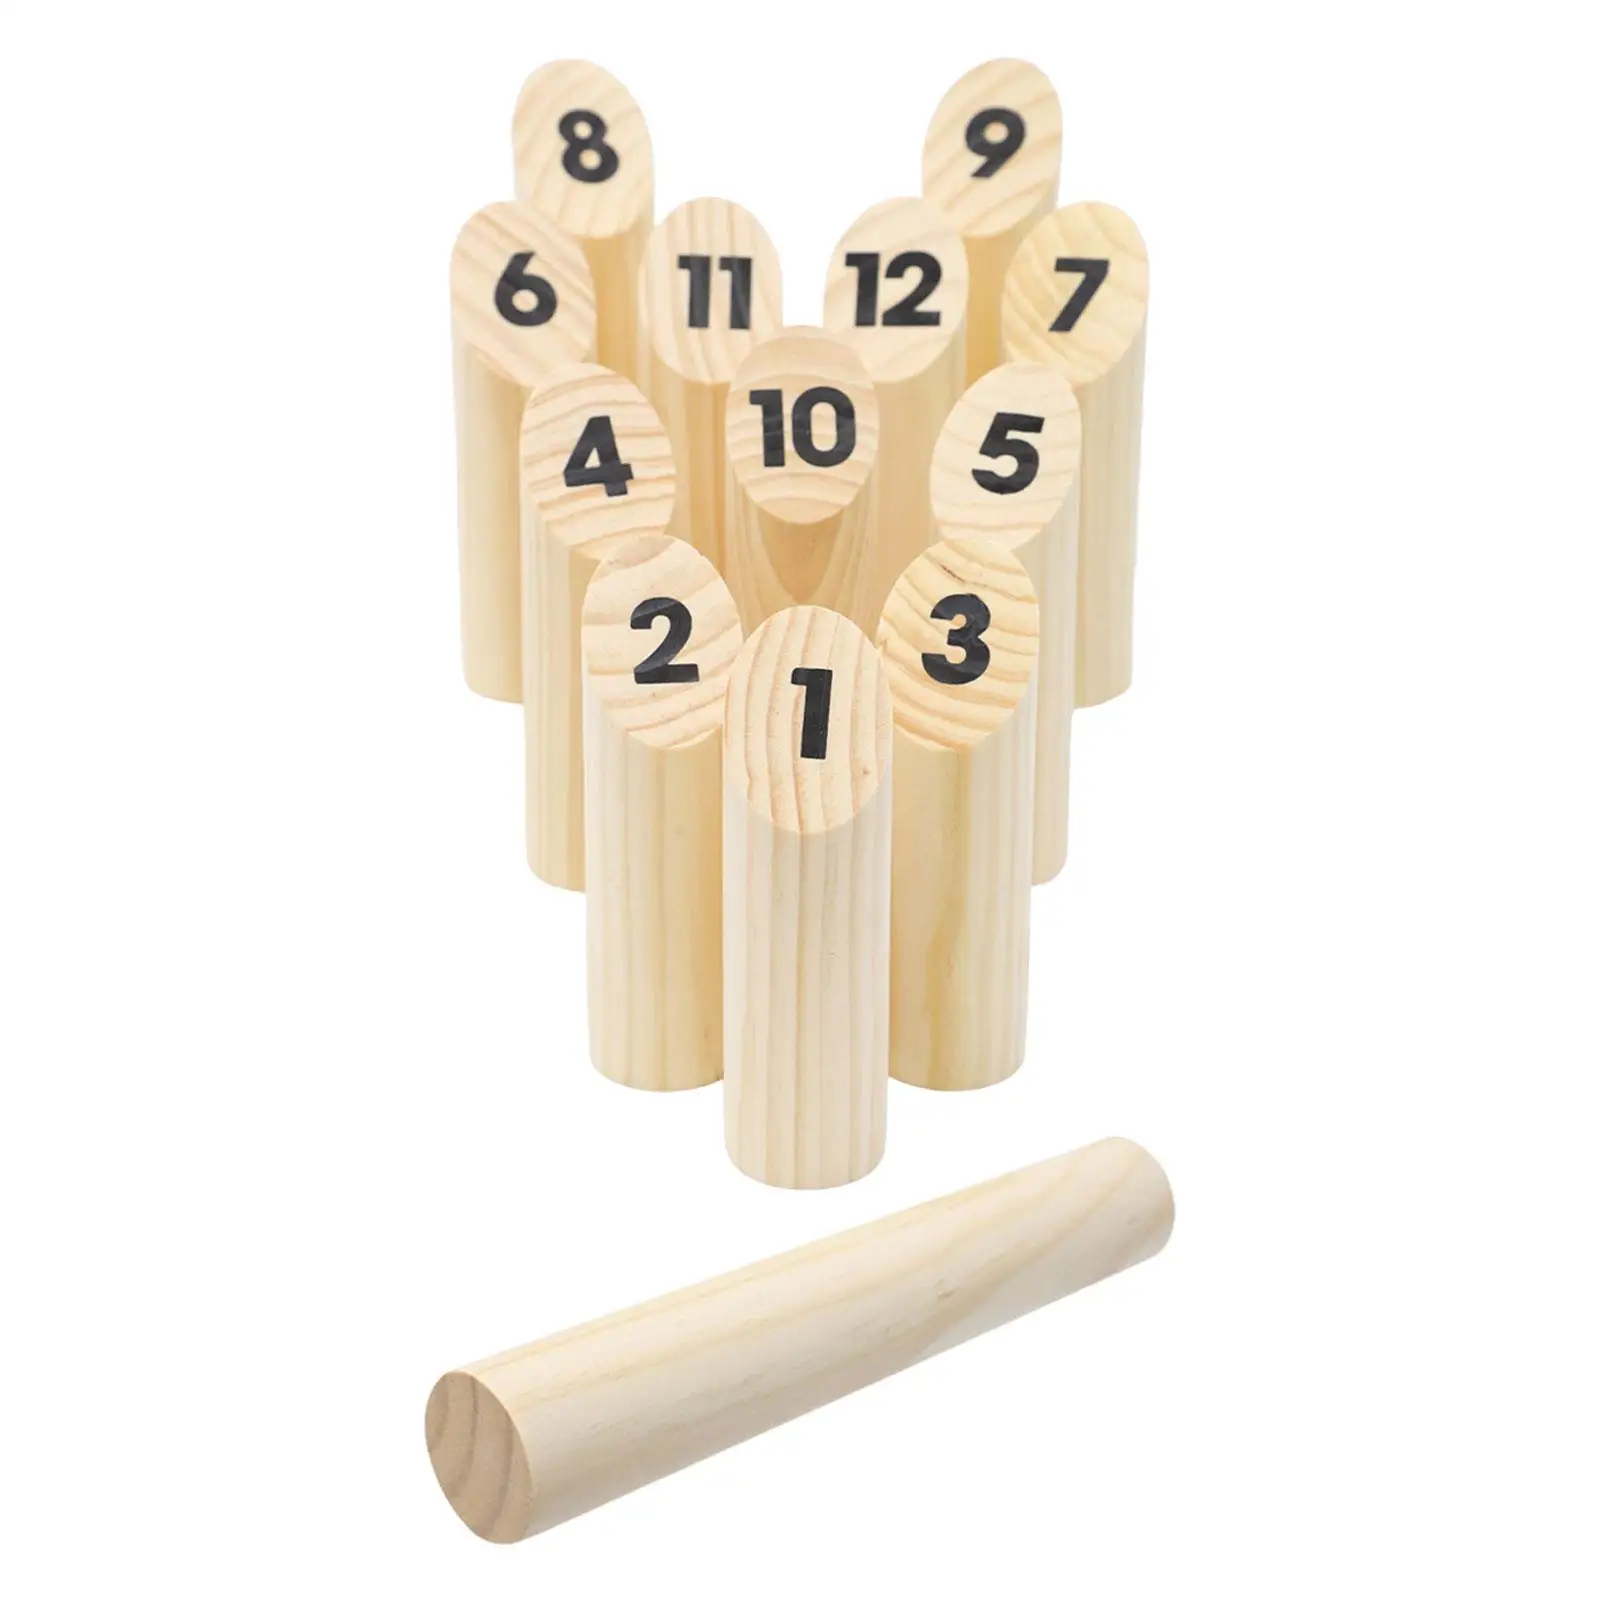 Wood Yard Game Toss Game Numbered Block Set for Indoor Outdoor Lawn Teen Adult Kids